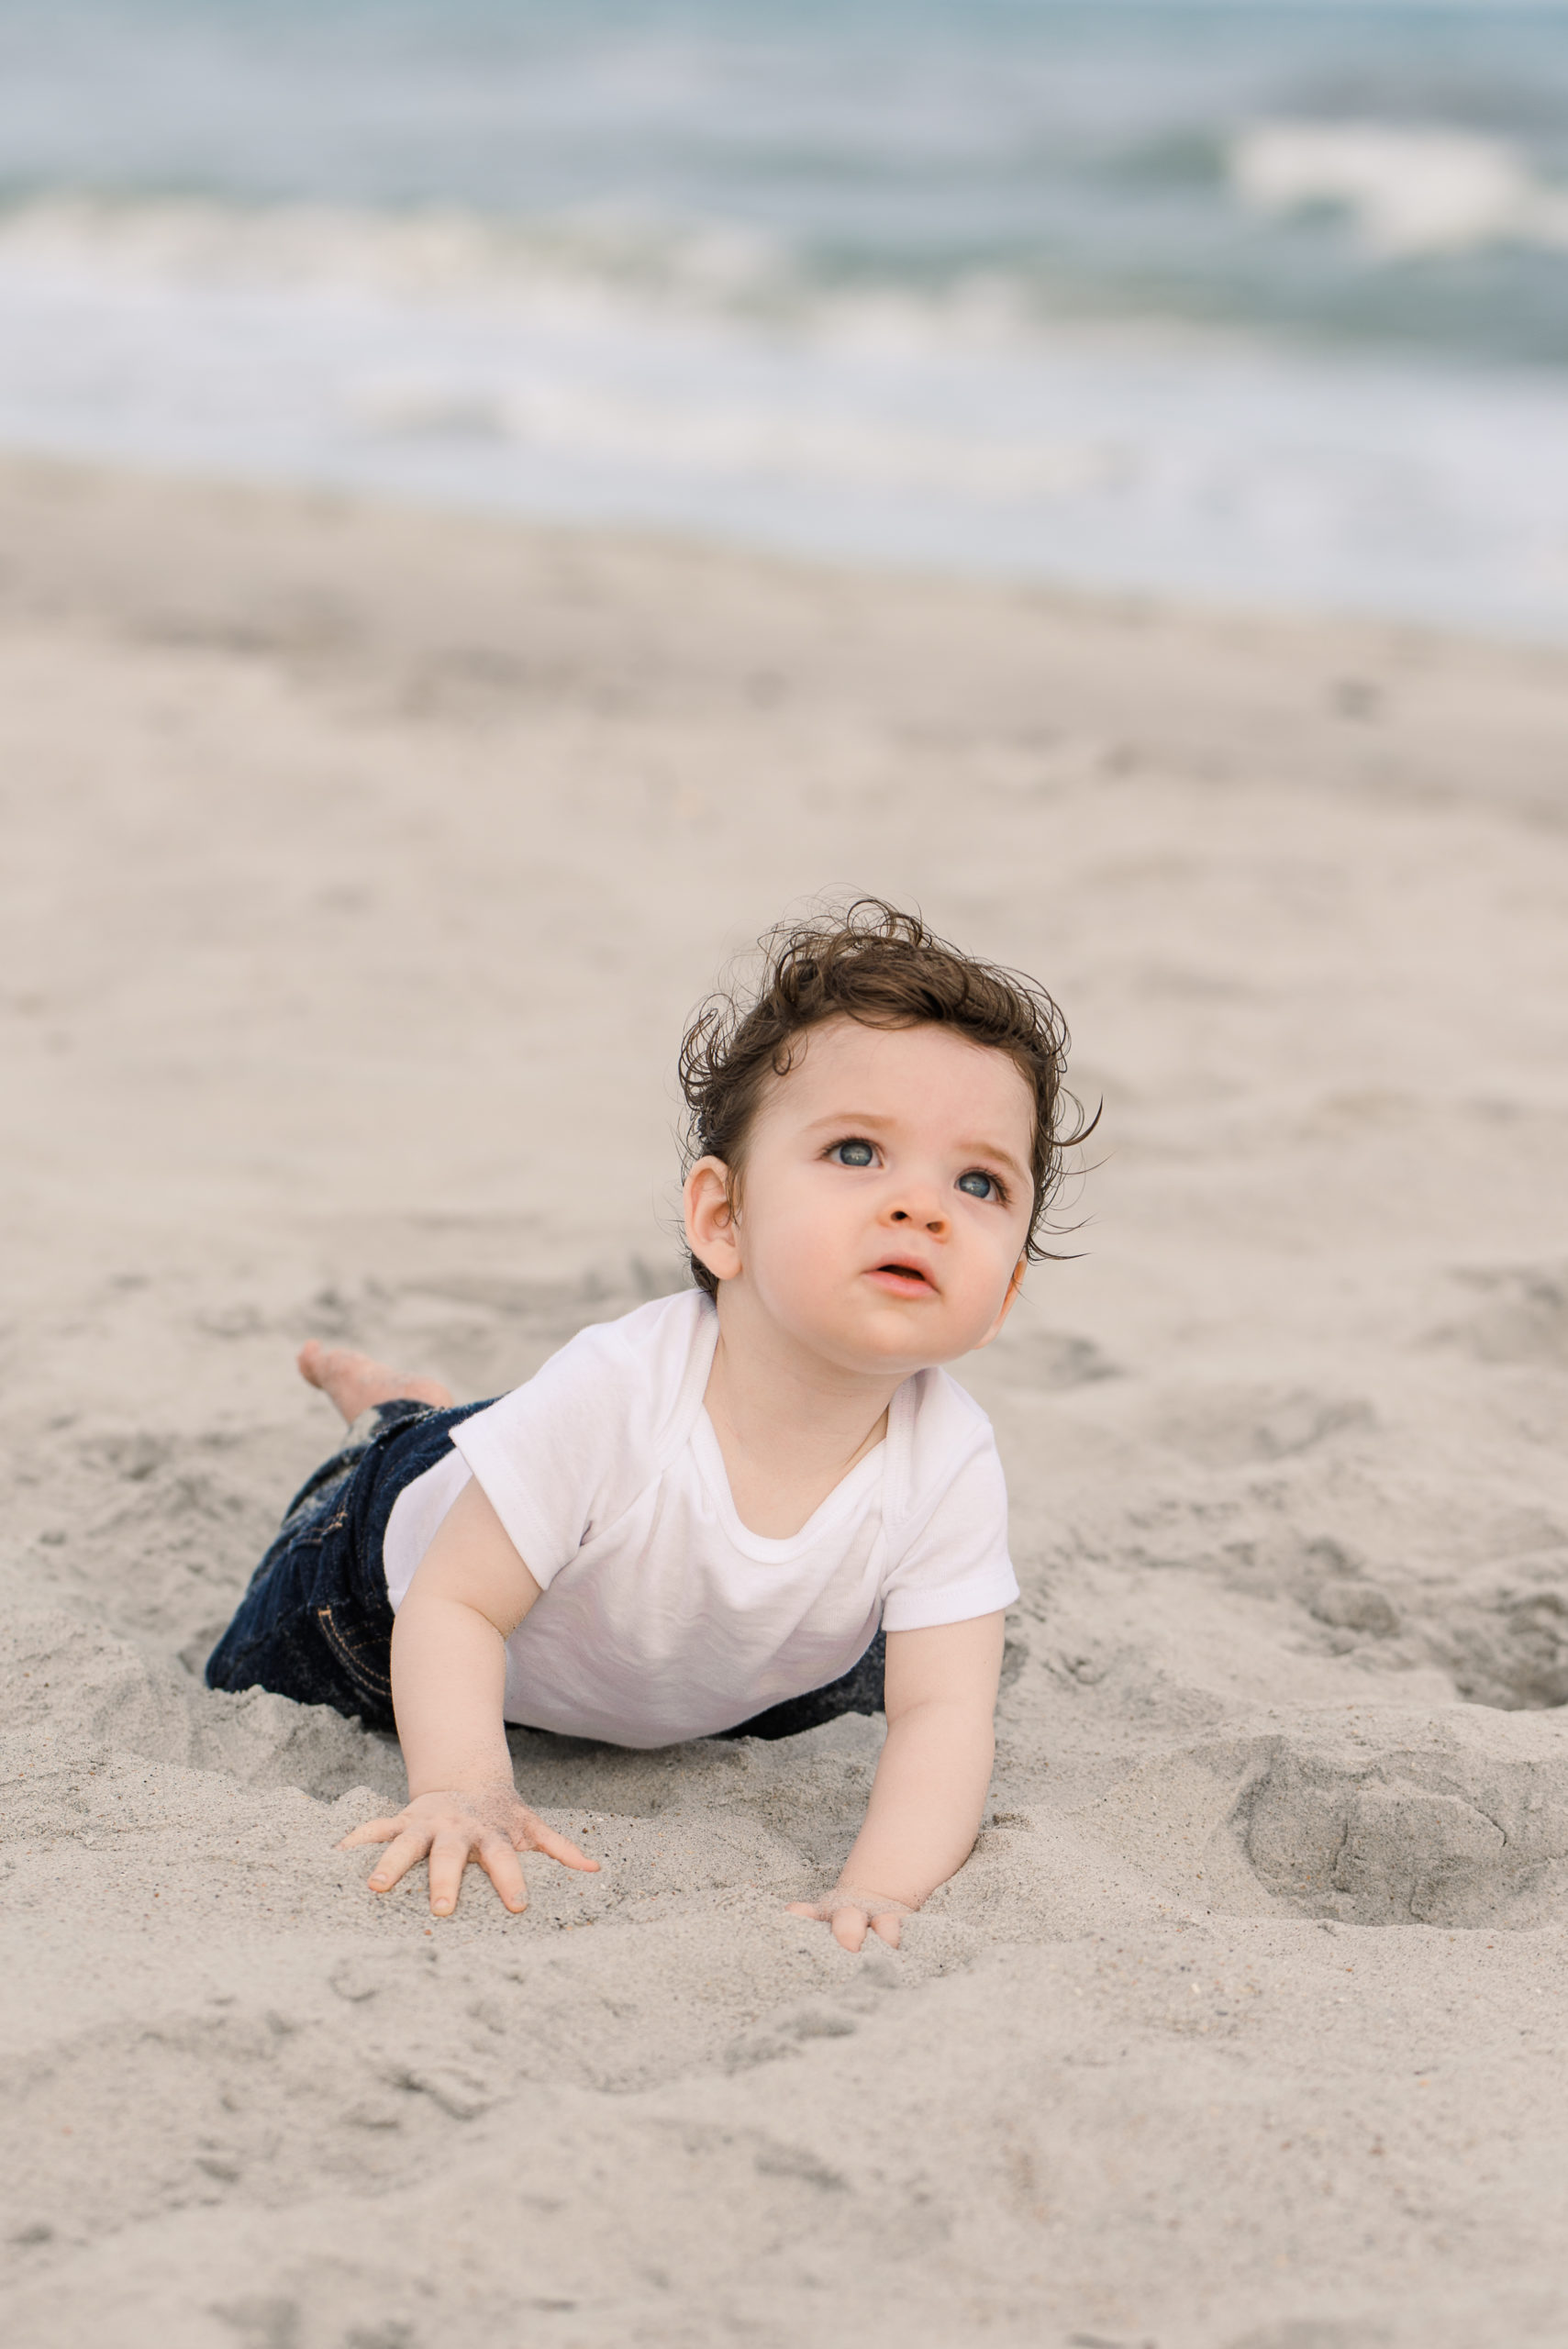 infant crawling on the beach